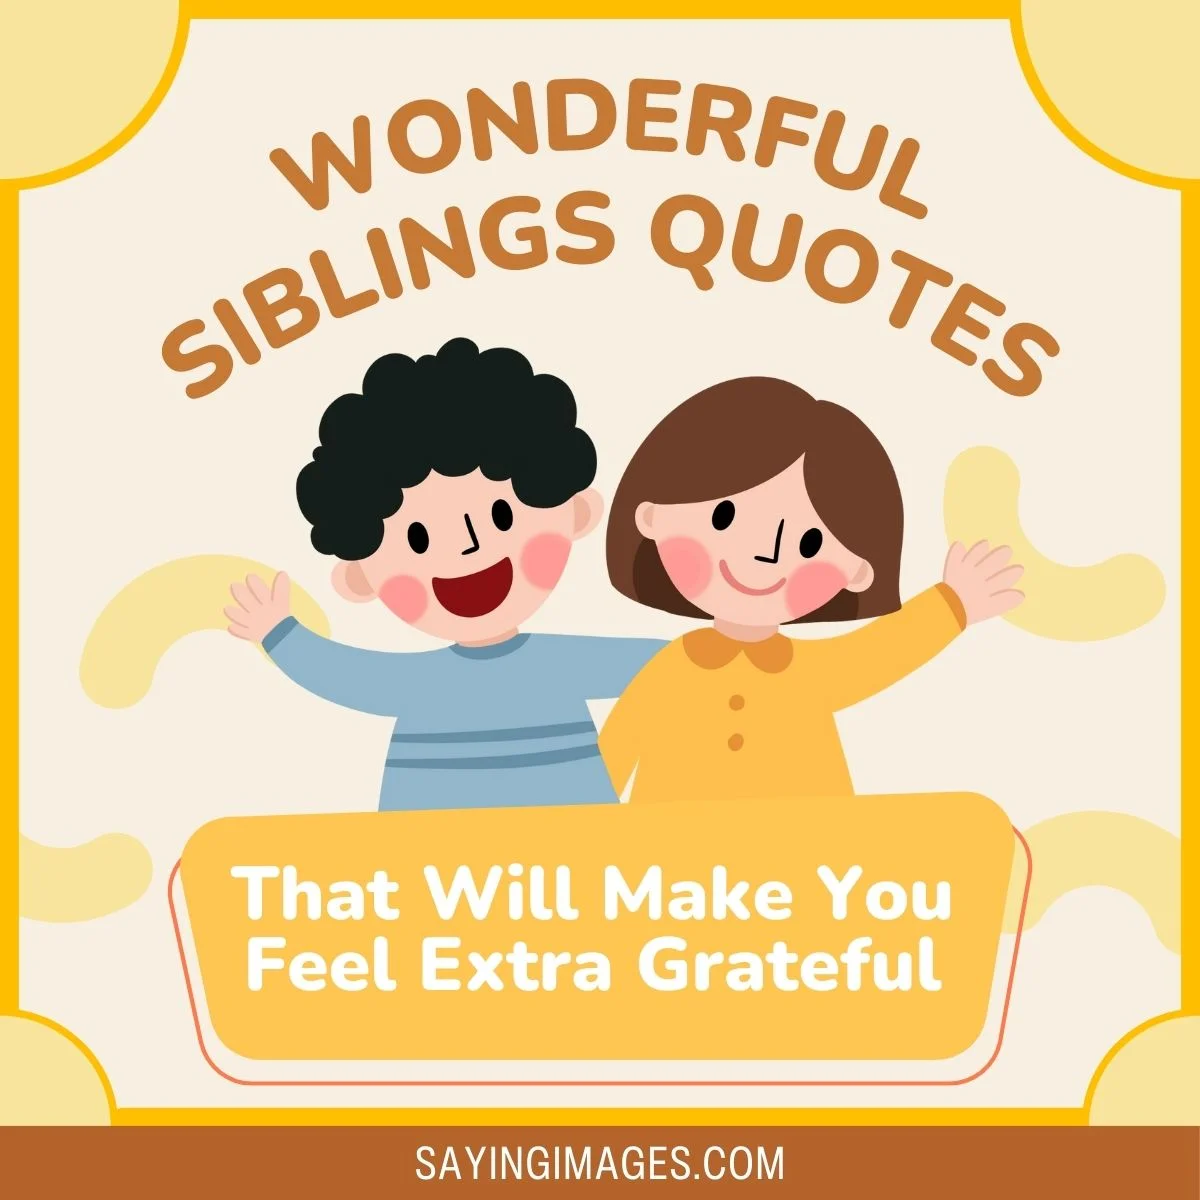 40 Wonderful Siblings Quotes to Make You Feel Extra Grateful